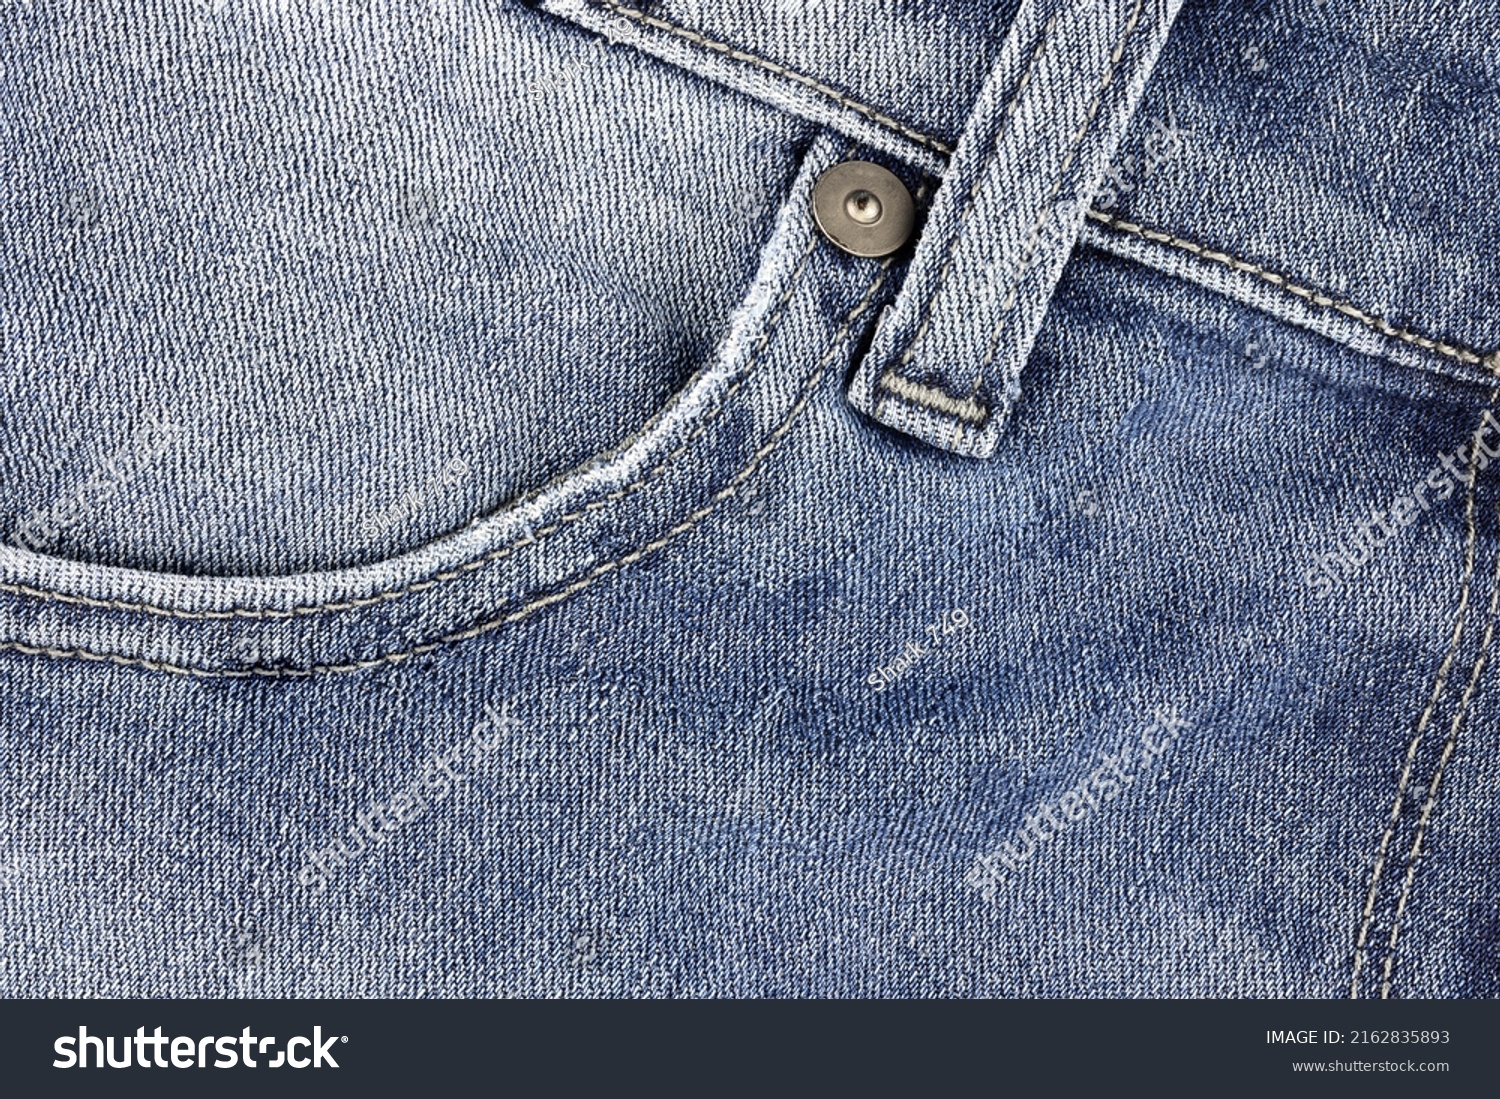 Blue Jeans Texture Abstract Background Stock Photo 2162835893 ...